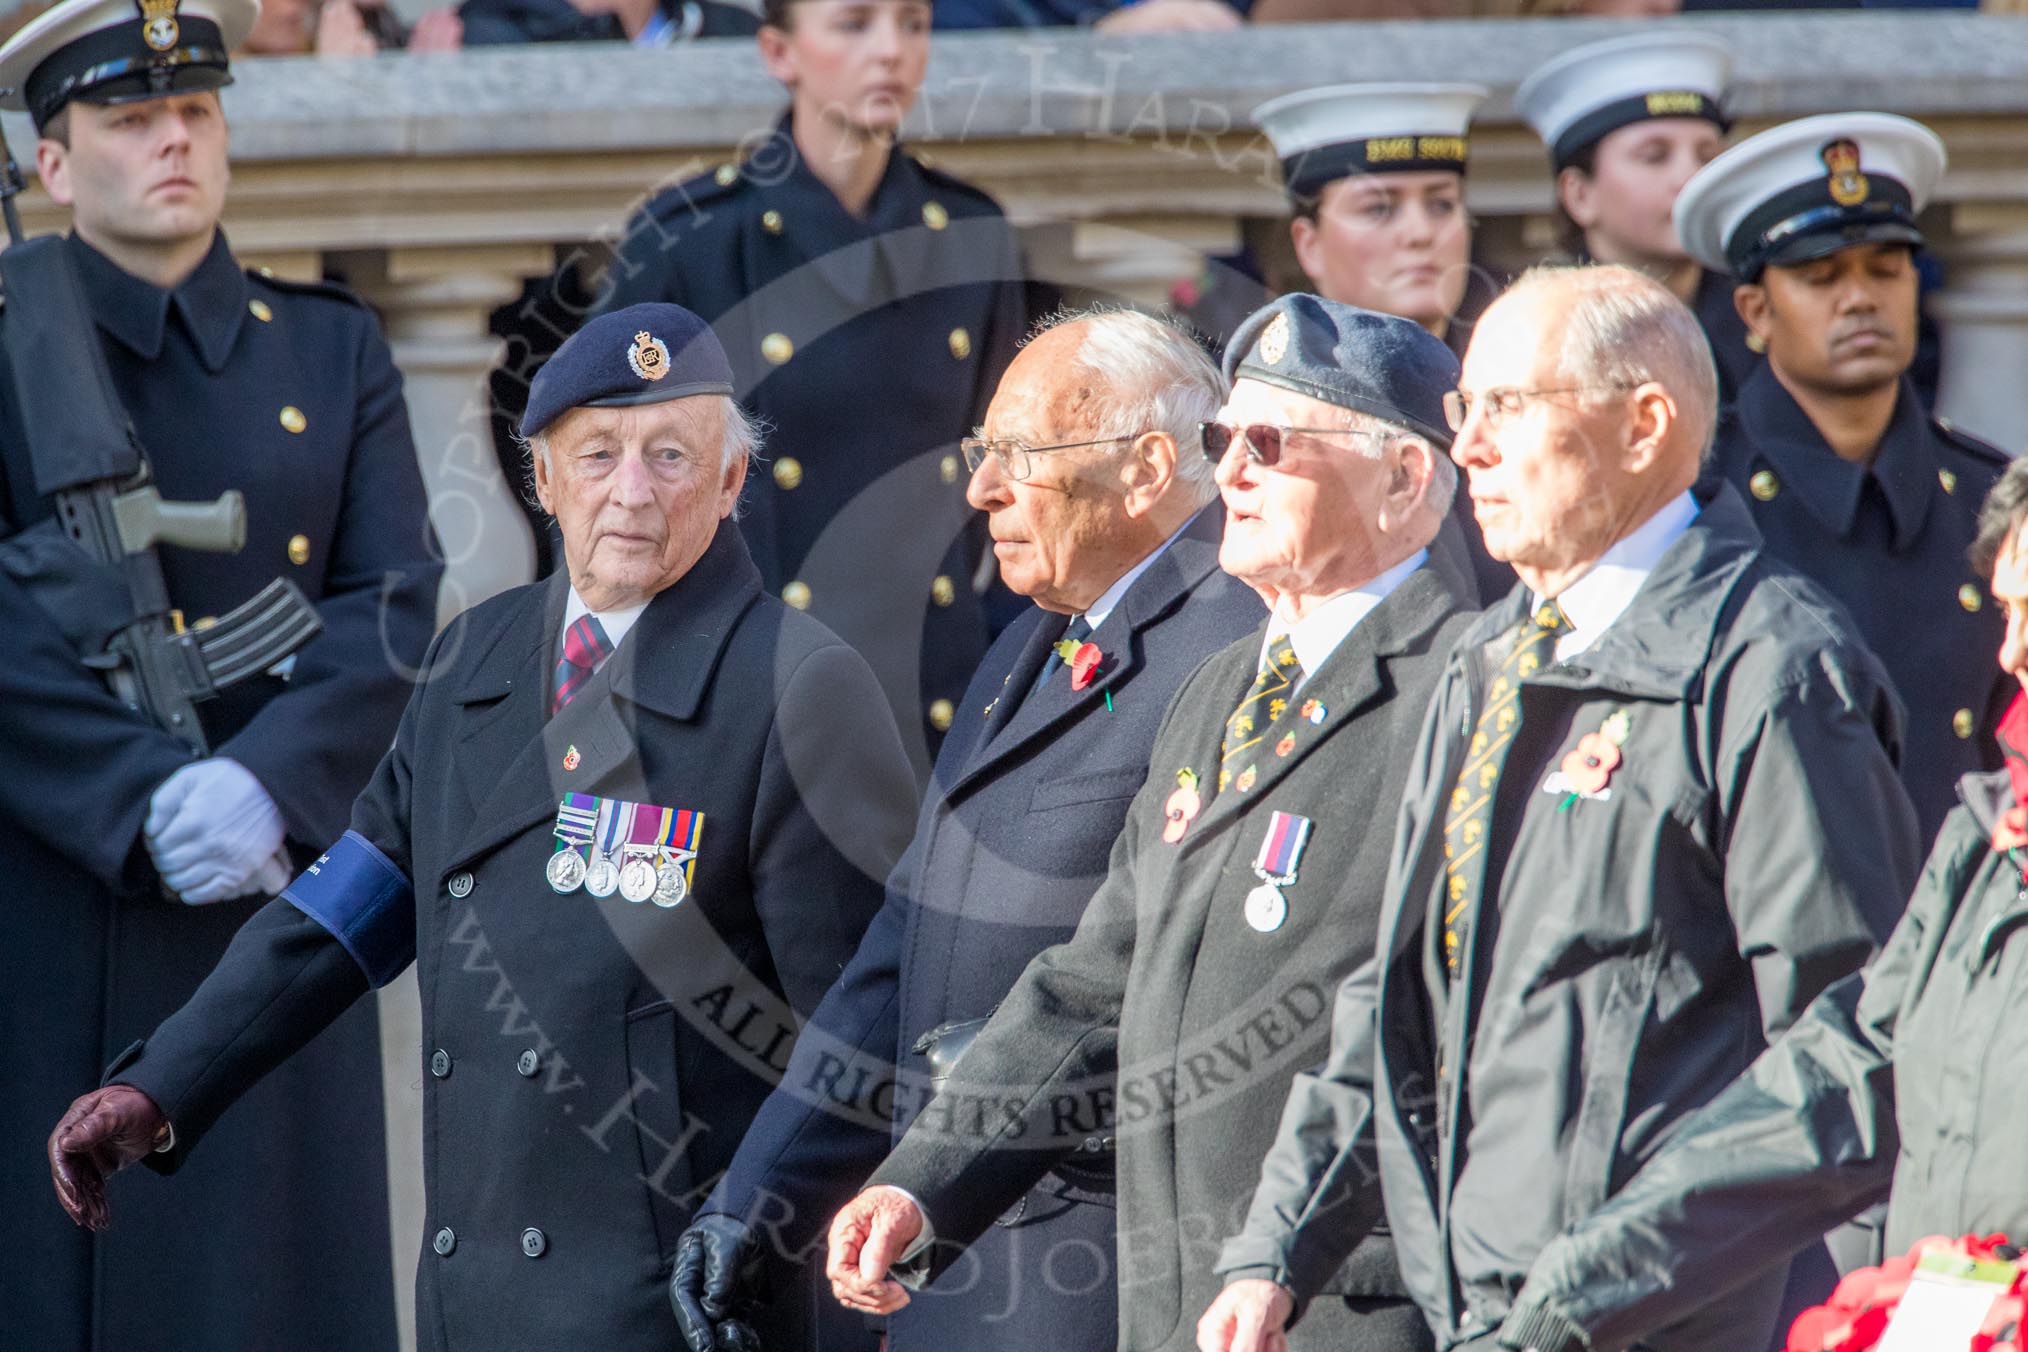 British Nuclear Tests Veterans Association  (Group D5, 30 members) during the Royal British Legion March Past on Remembrance Sunday at the Cenotaph, Whitehall, Westminster, London, 11 November 2018, 12:21.